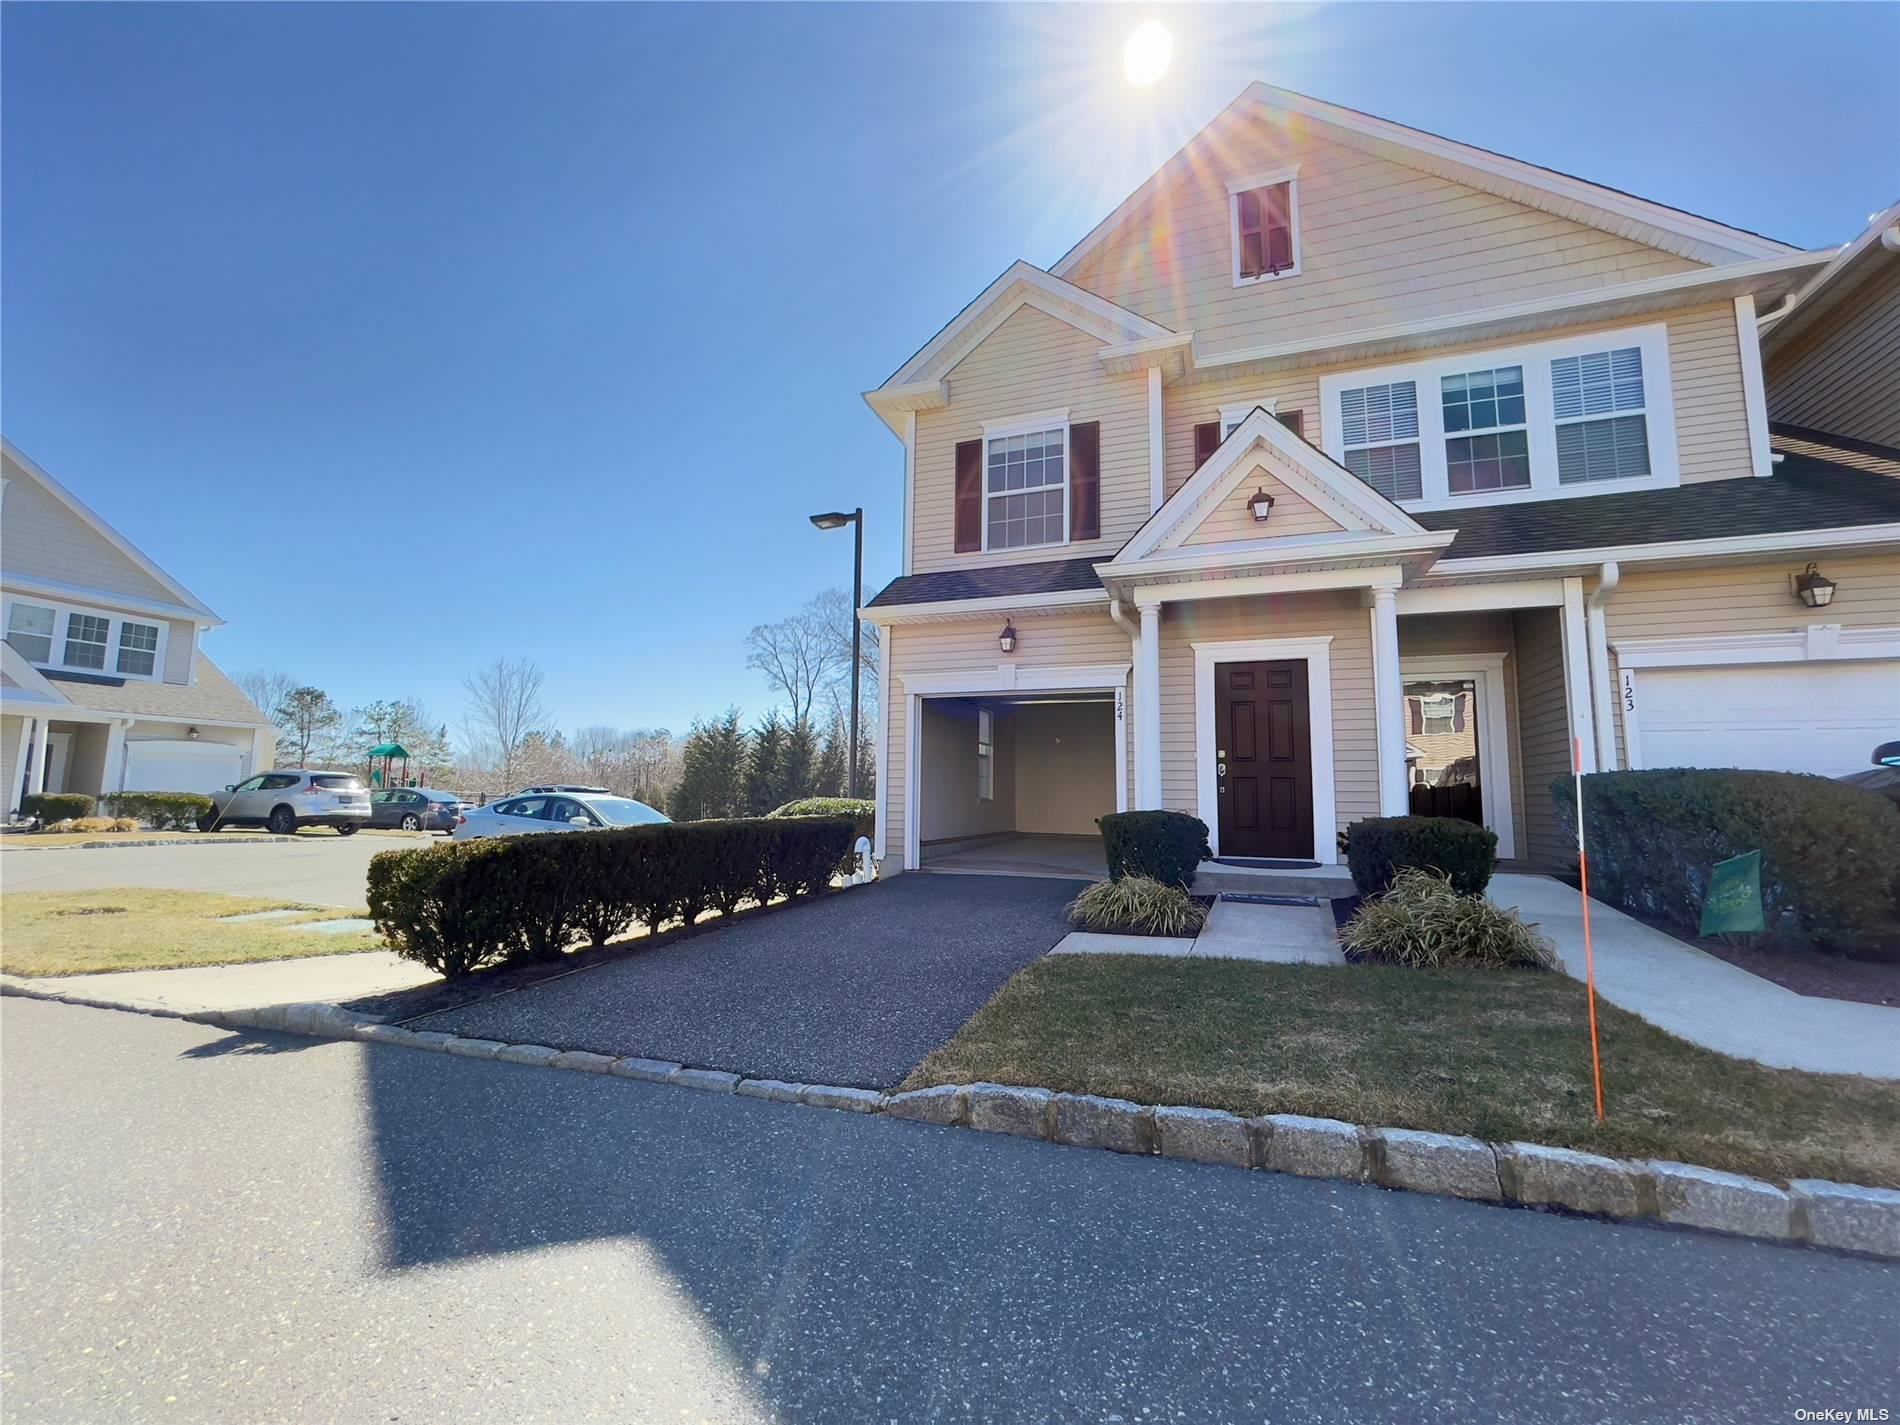 Listing in Holtsville, NY